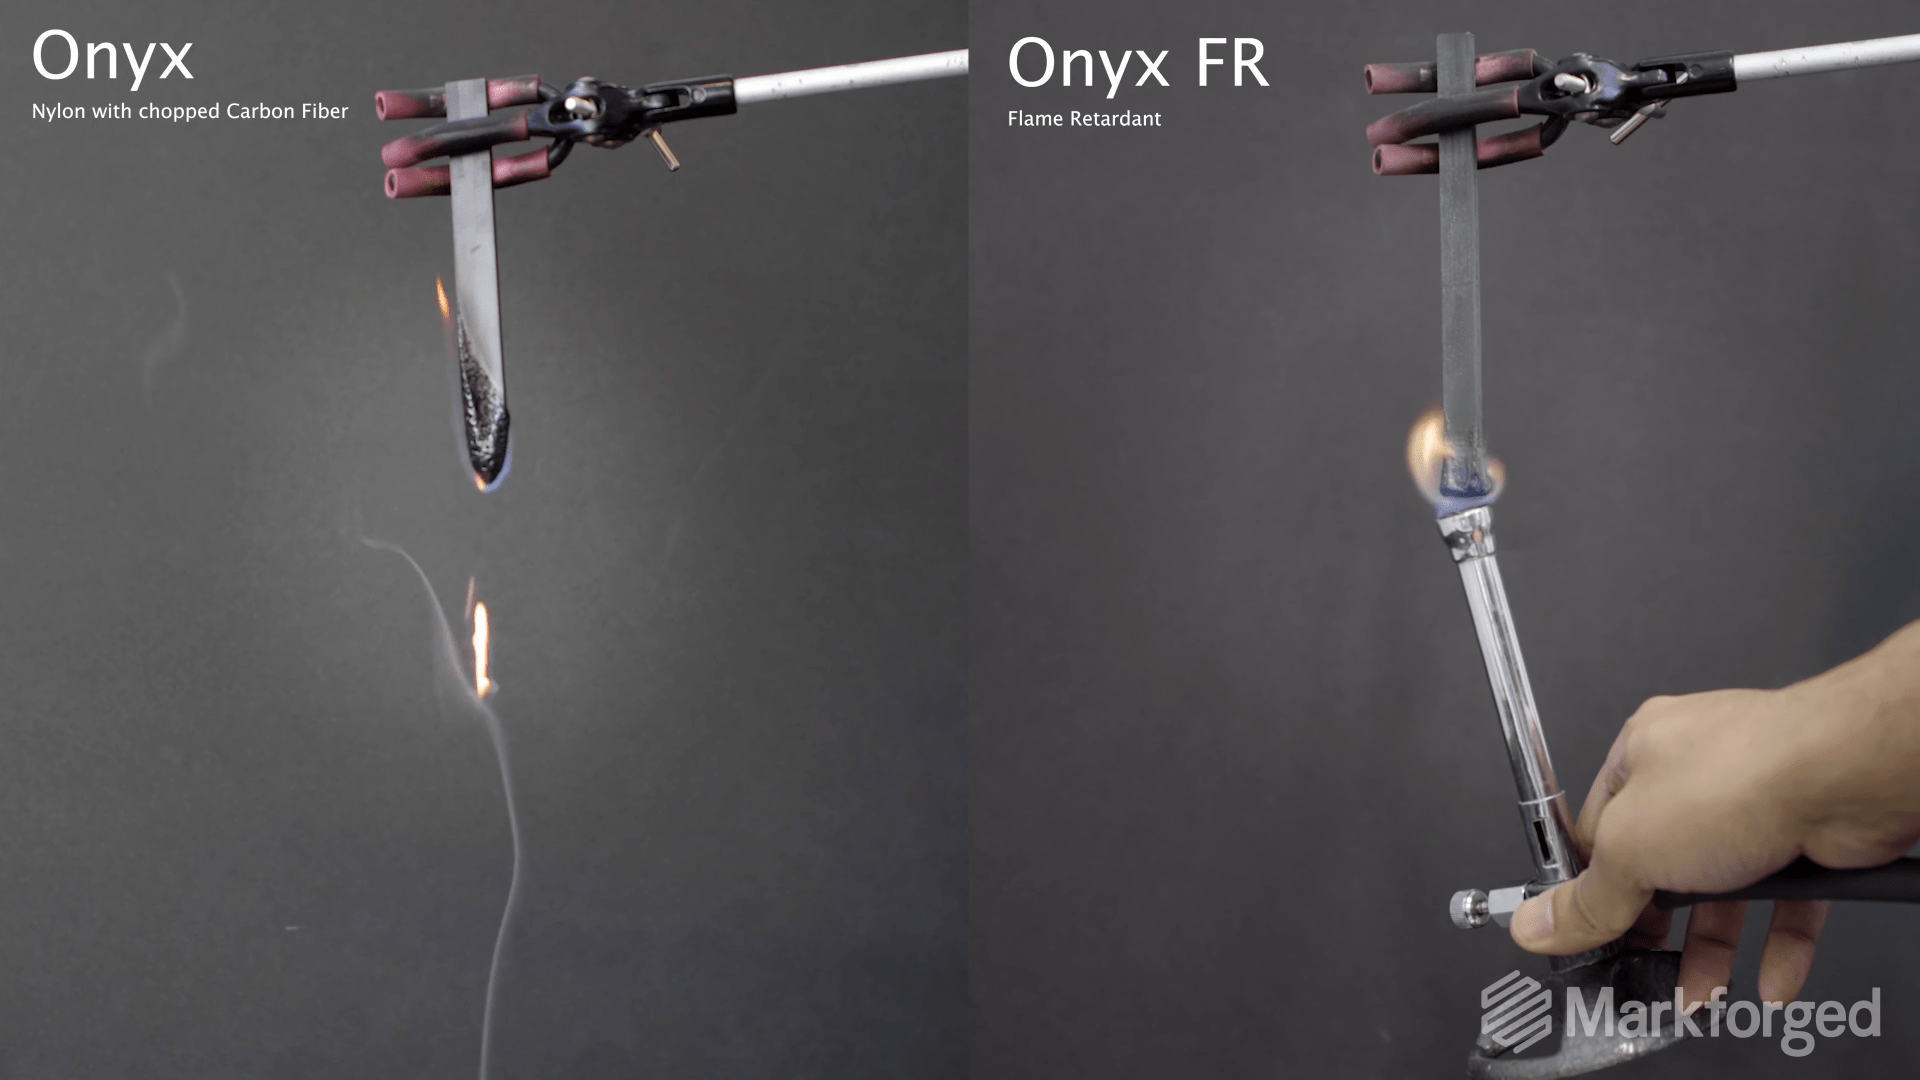 Onyx FR is just one example of Markforged materials that have excellent Flame Smoke Toxicity ratings. 